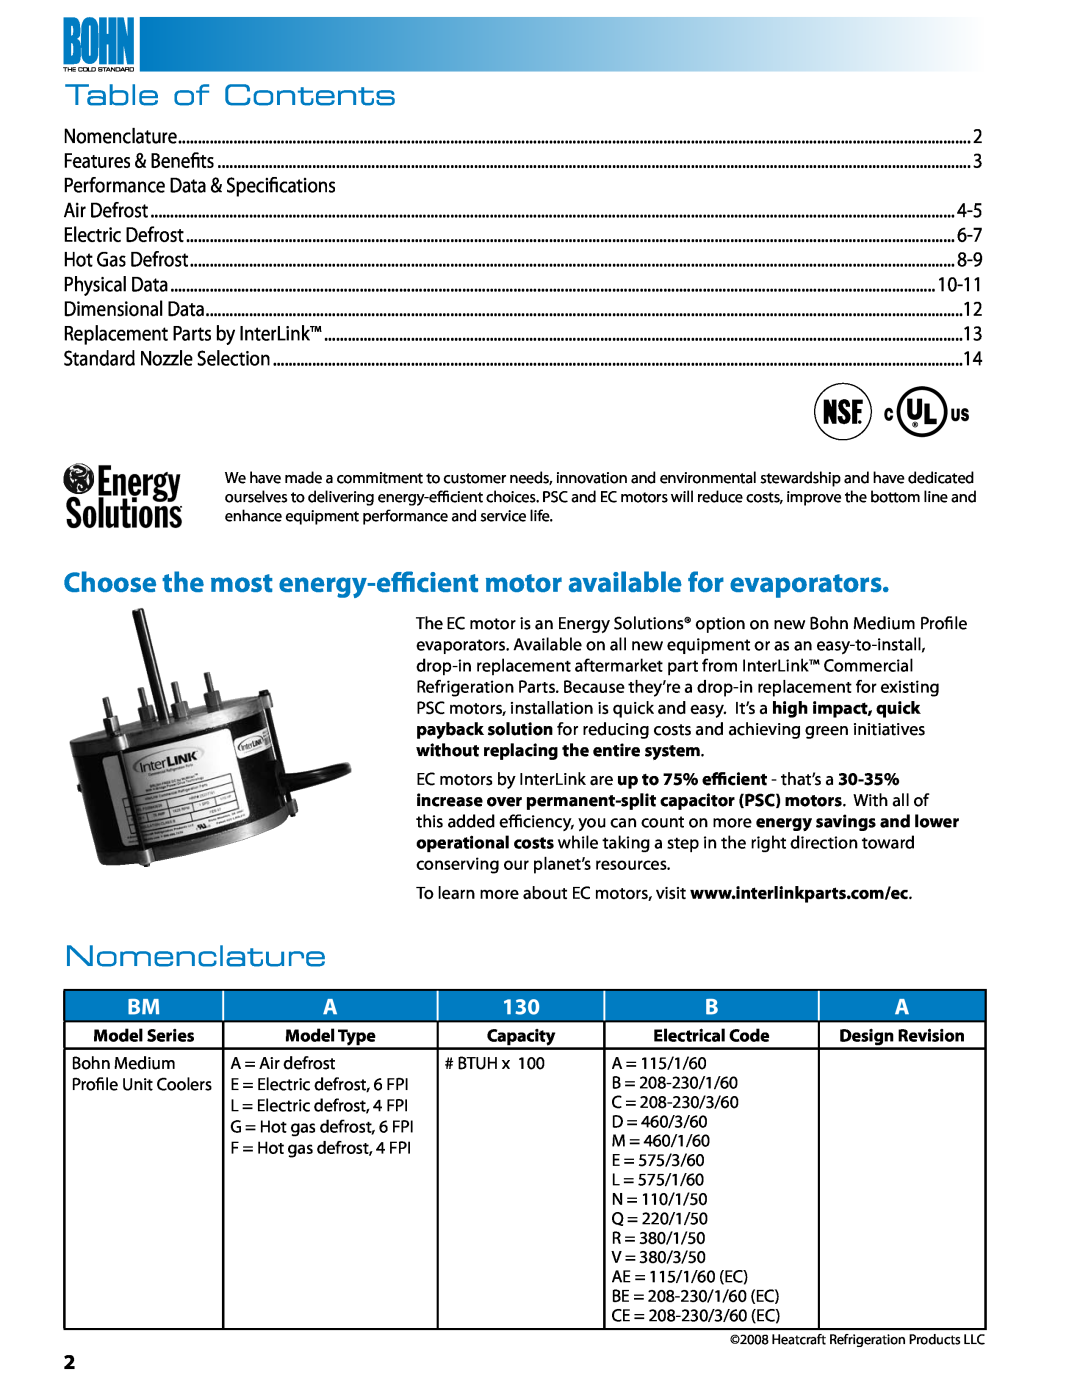 Heatcraft Refrigeration Products BMF Table of Contents, Nomenclature, Model Series, Model Type, Capacity, Electrical Code 